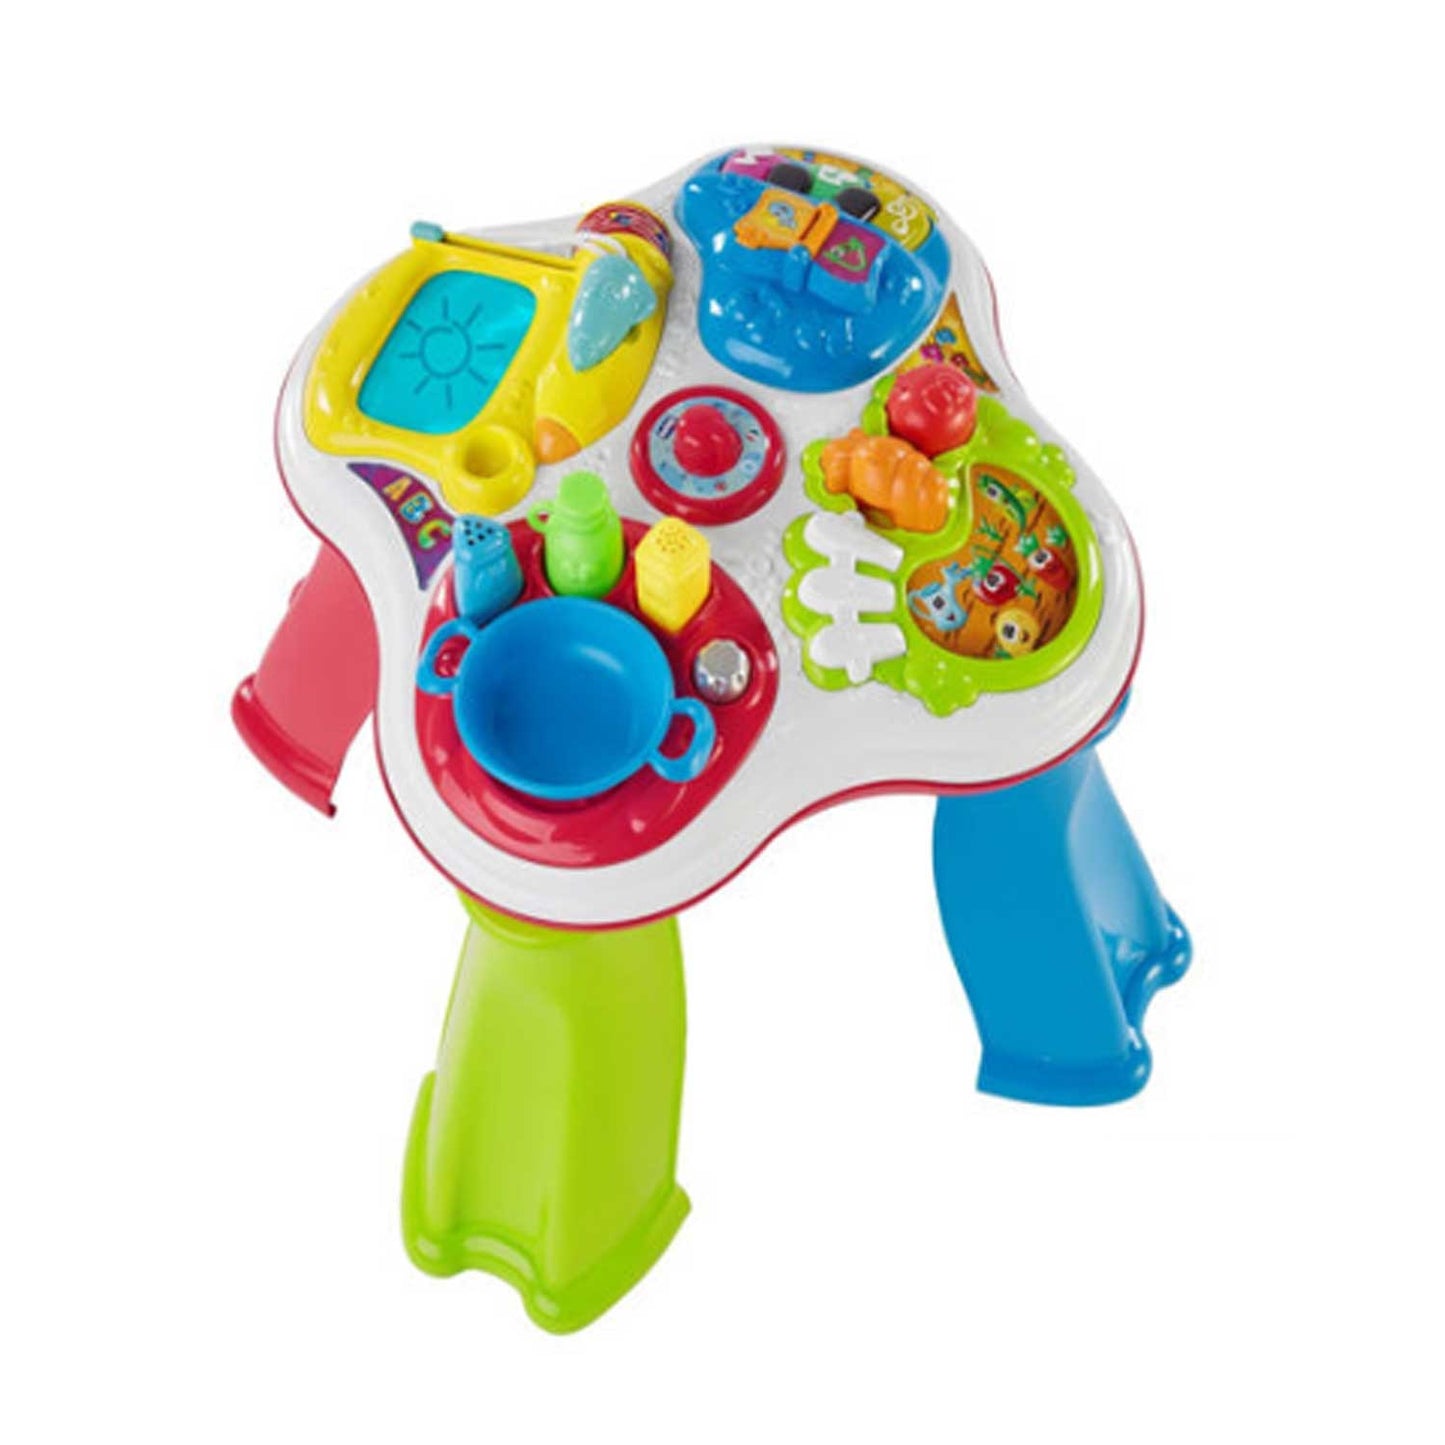 Chicco - Grow and Learn Hobby Table